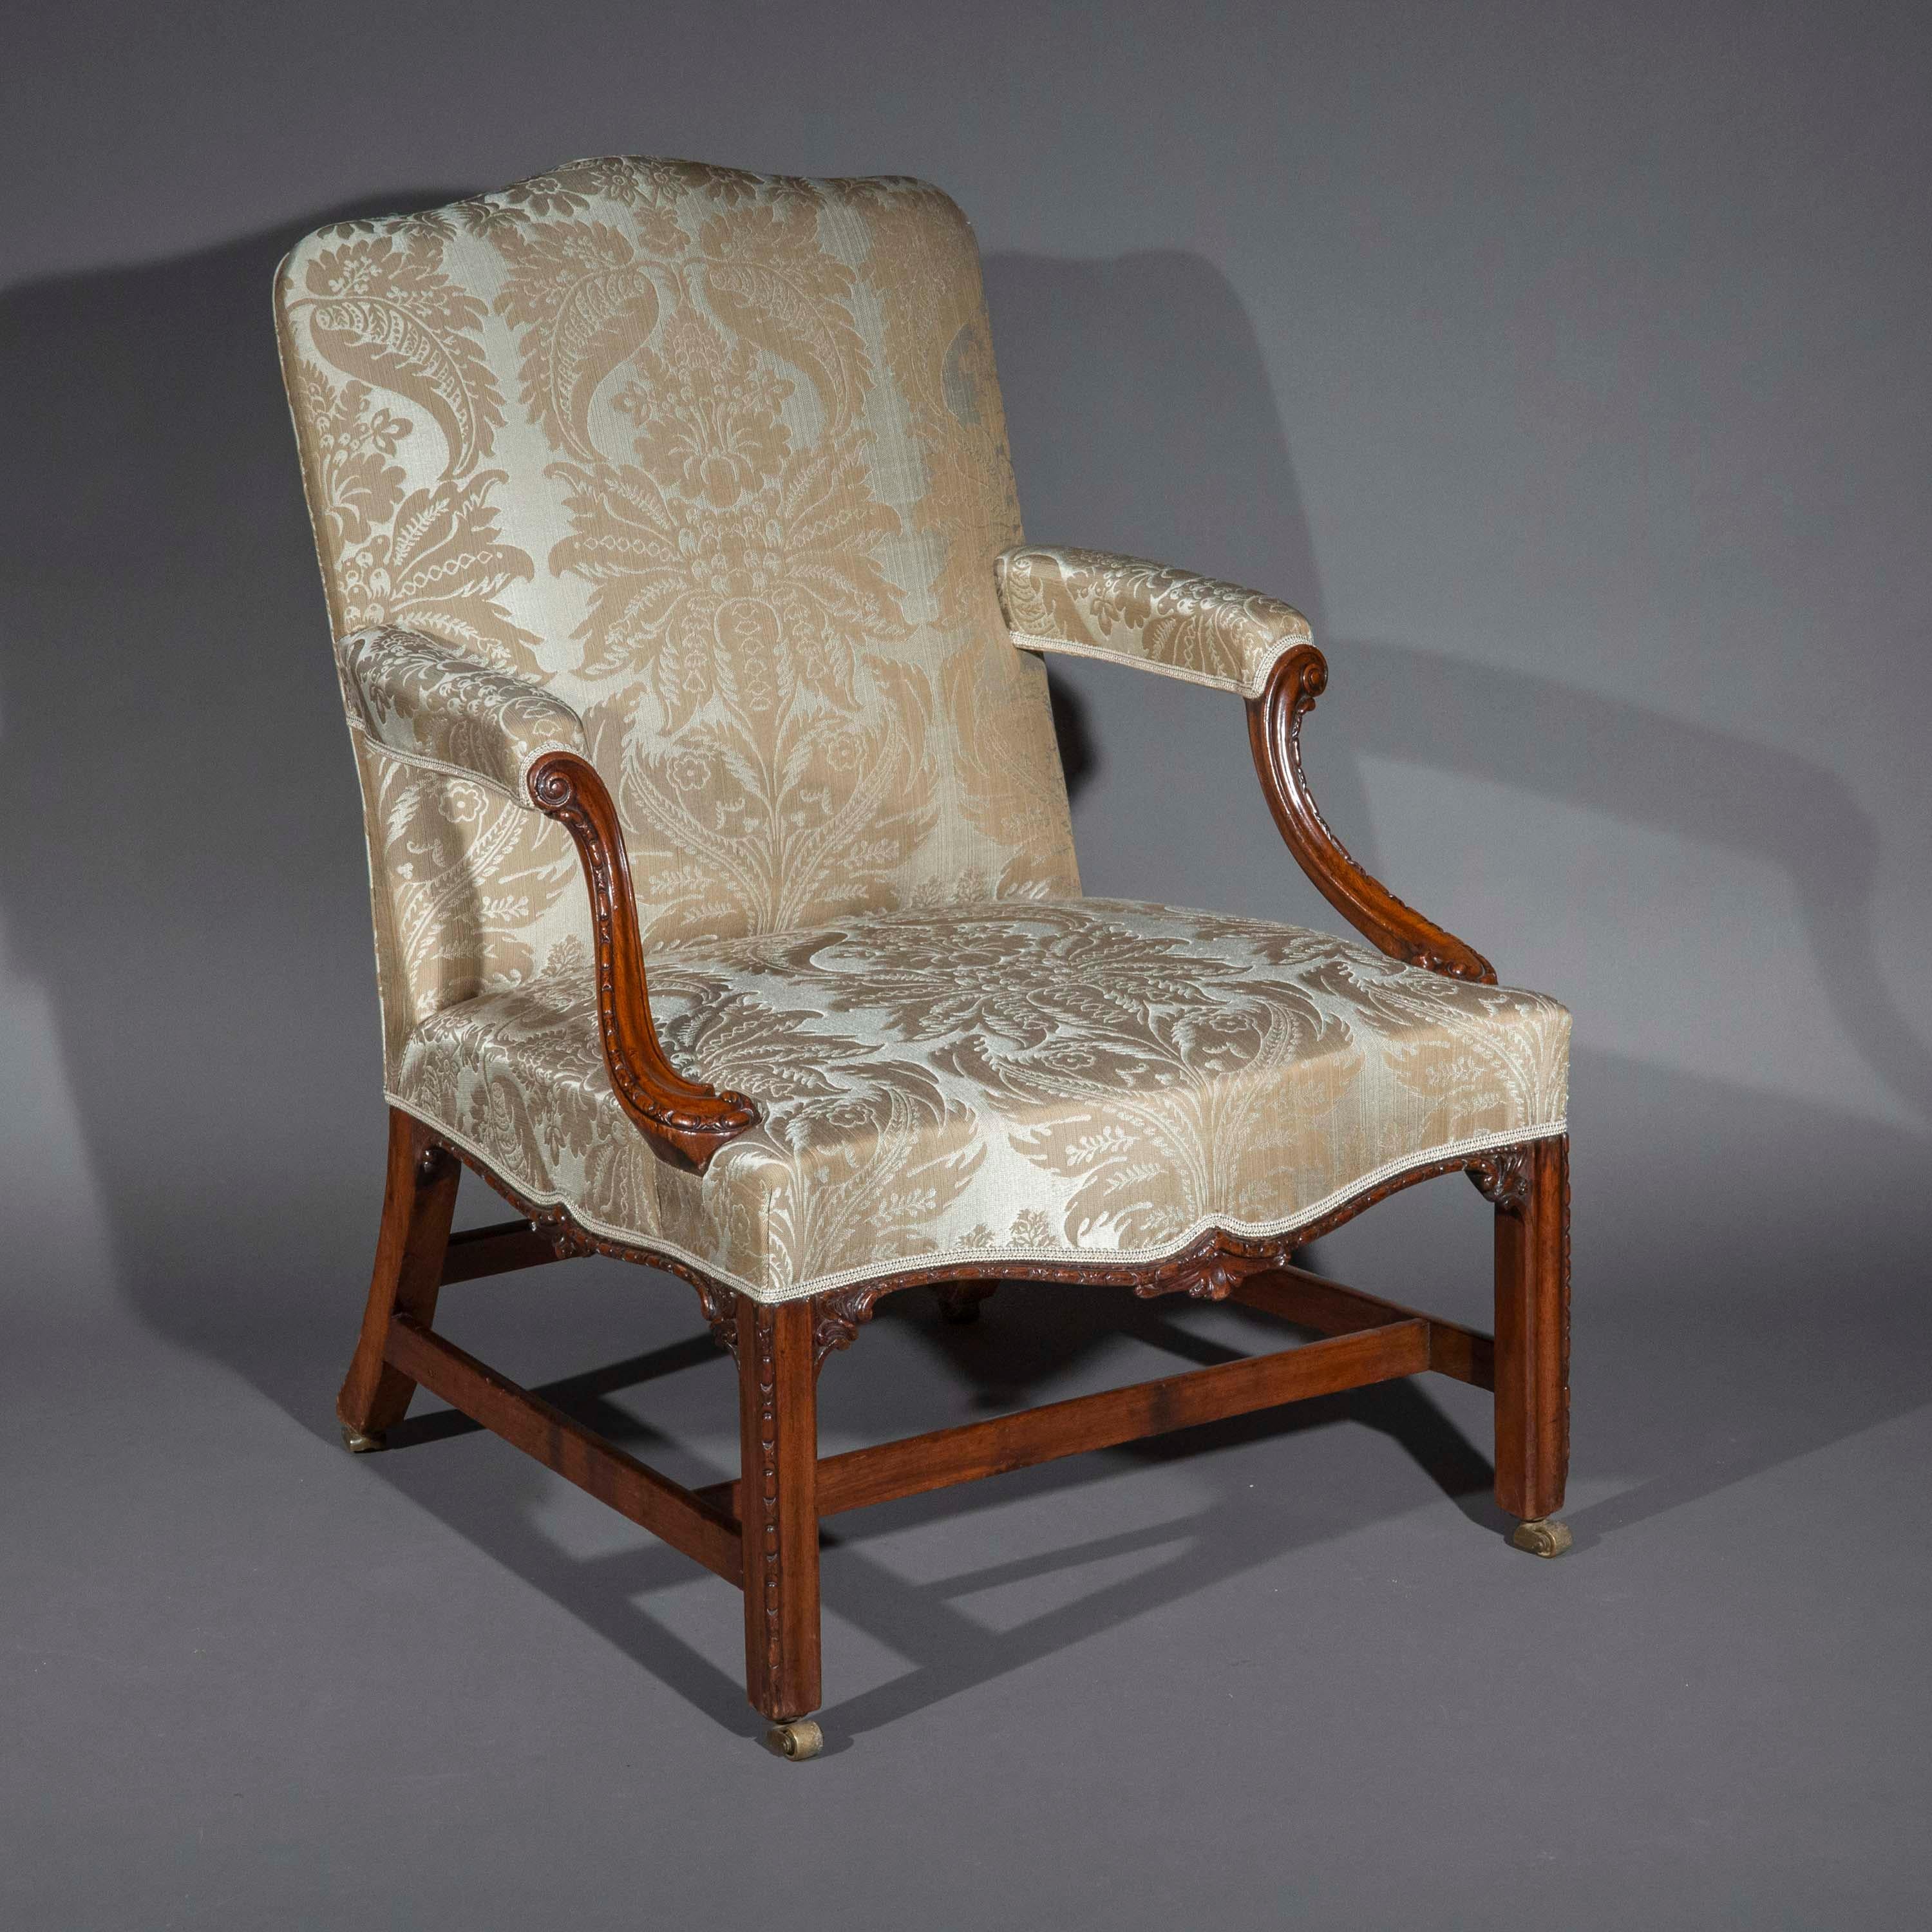 Large English Chippendale Gainsborough Armchair, mid-18th Century For Sale 6